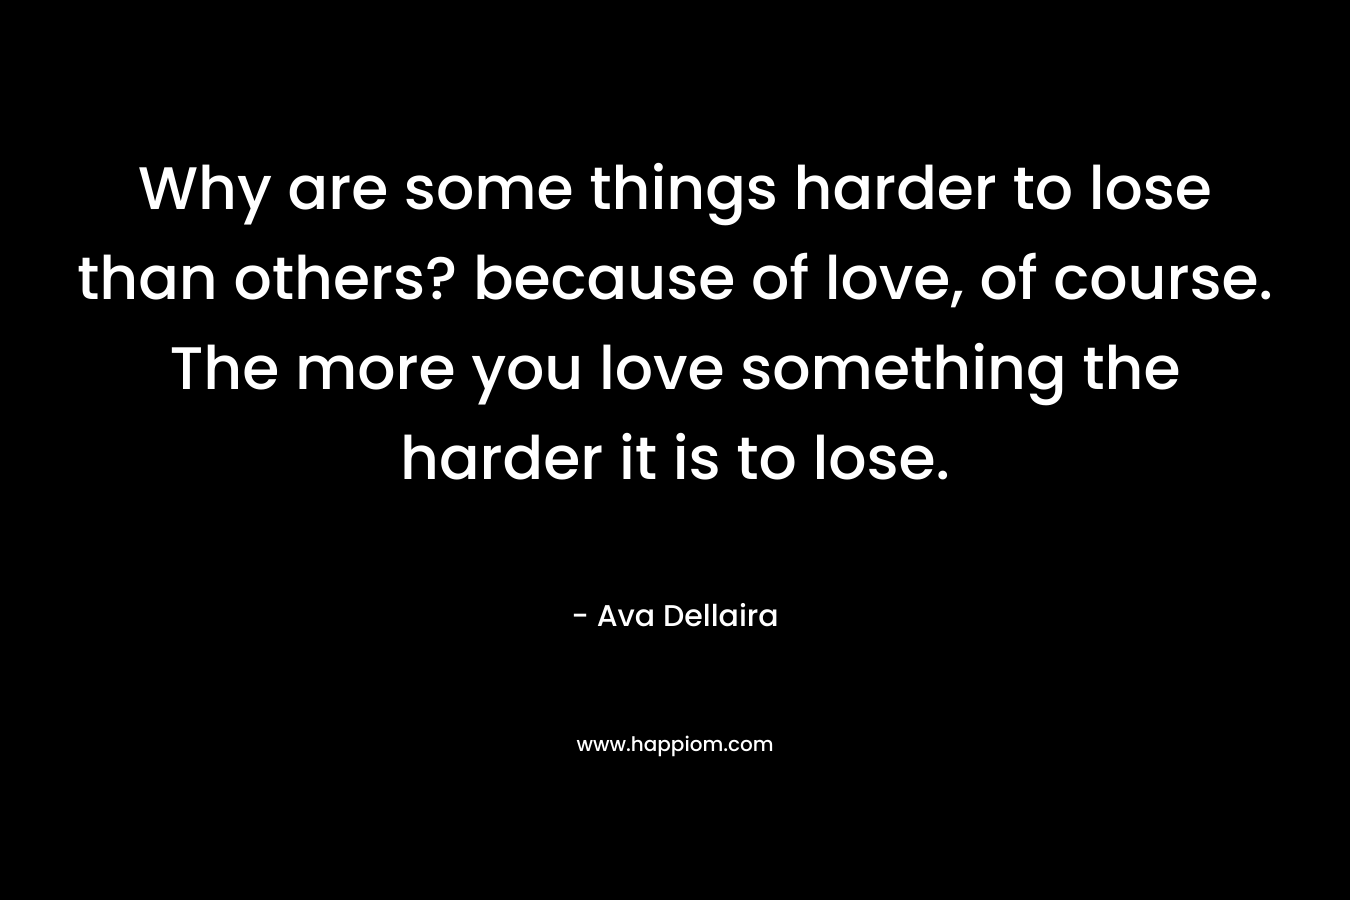 Why are some things harder to lose than others? because of love, of course. The more you love something the harder it is to lose. – Ava Dellaira